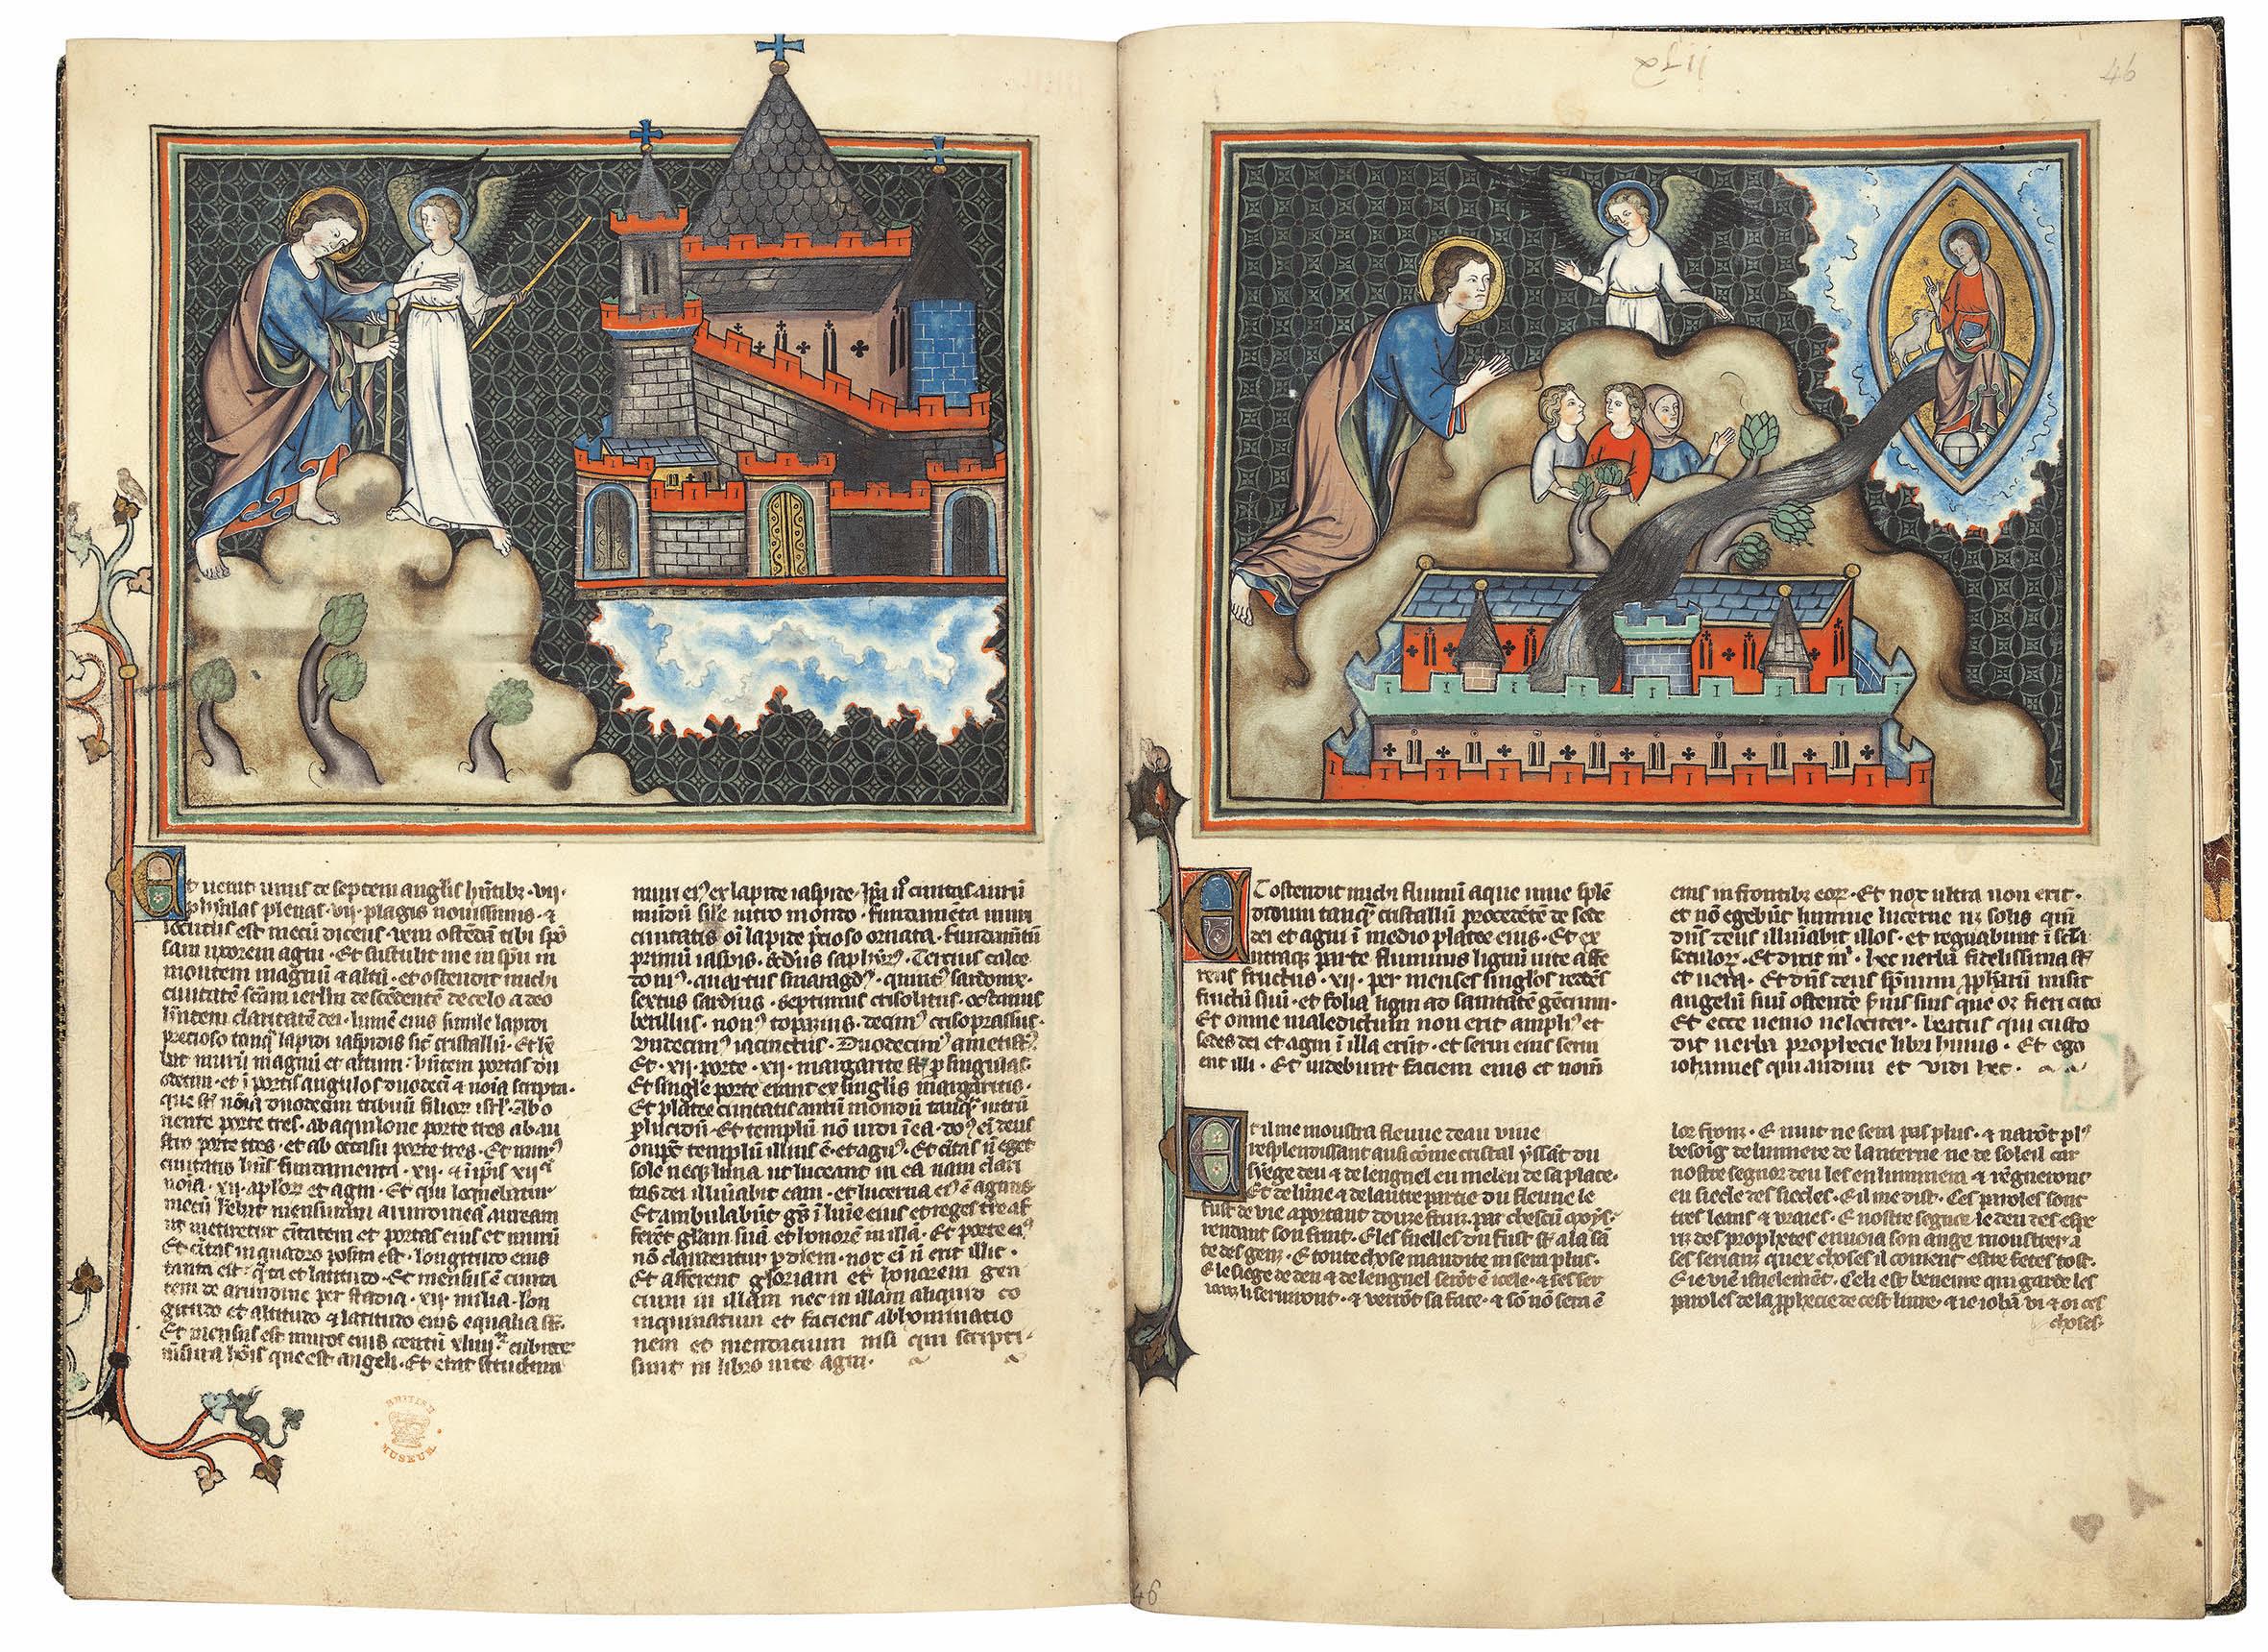 This is a unique facsimile reproduction limited to 987 copies of a medieval manuscript, the Apocalypse Val-Dieu, owned by the British Library, made by combining the highest technology with the mastery of the craftsmen bookbinders who have handmade